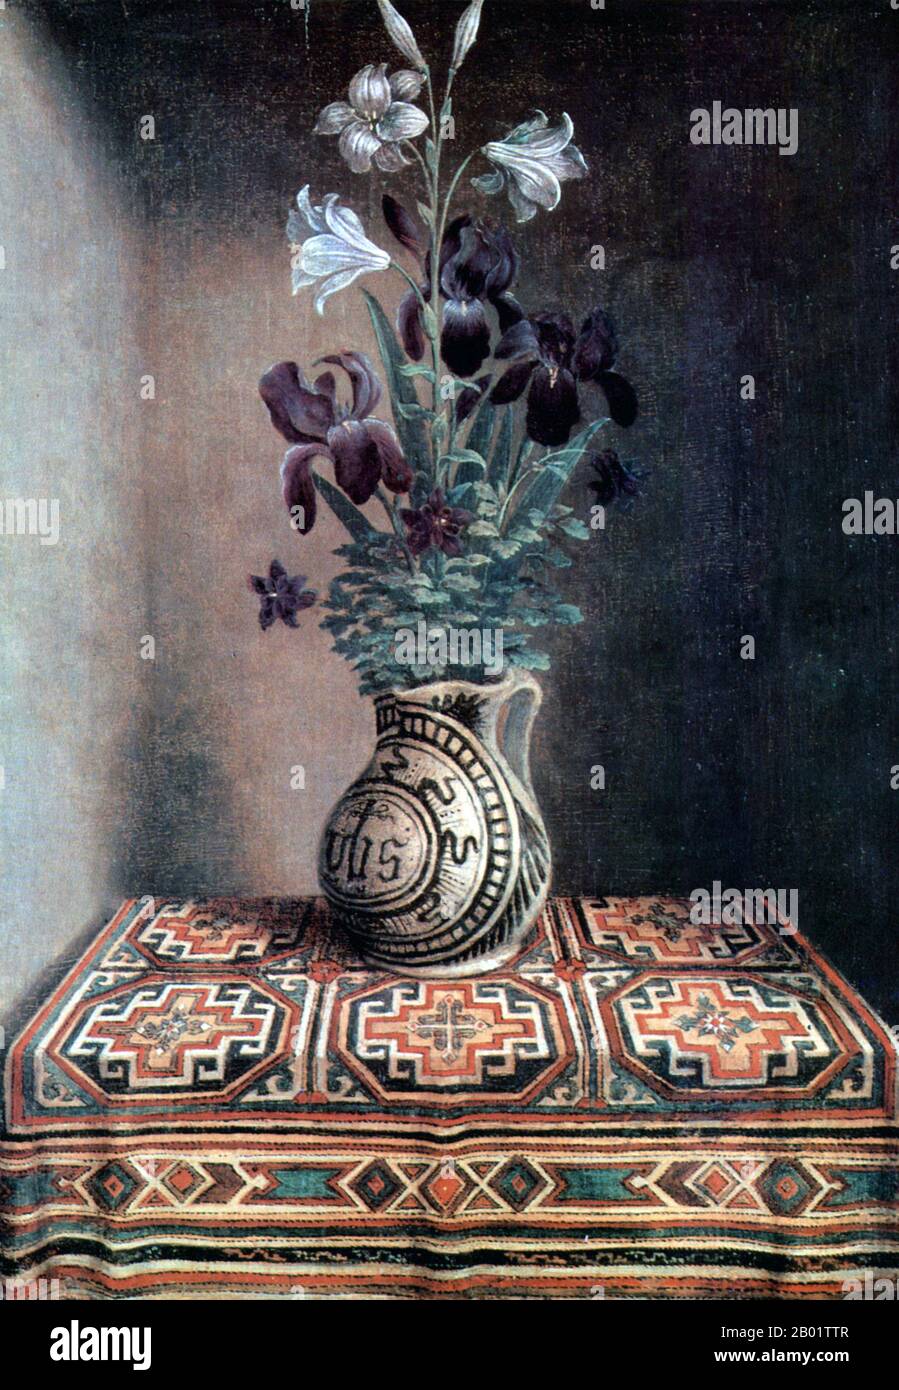 Belgium / Netherlands: 'Still Life with a Jug with Flowers'. Oil on panel painting by Hans Memling (c. 1433-1494), c. 1480.  Hans Memling/Memlinc was a German-Flemish painter from the Early Netherlandish tradition of painting. Born in the Middle Rhine, he apprenticed in the Netherlands and spent time in Brussels. In 1465 he became a citizen of Bruges, becoming one of the leading artists and master of a large workshop. He became one of the city's wealthiest citizens. Stock Photo